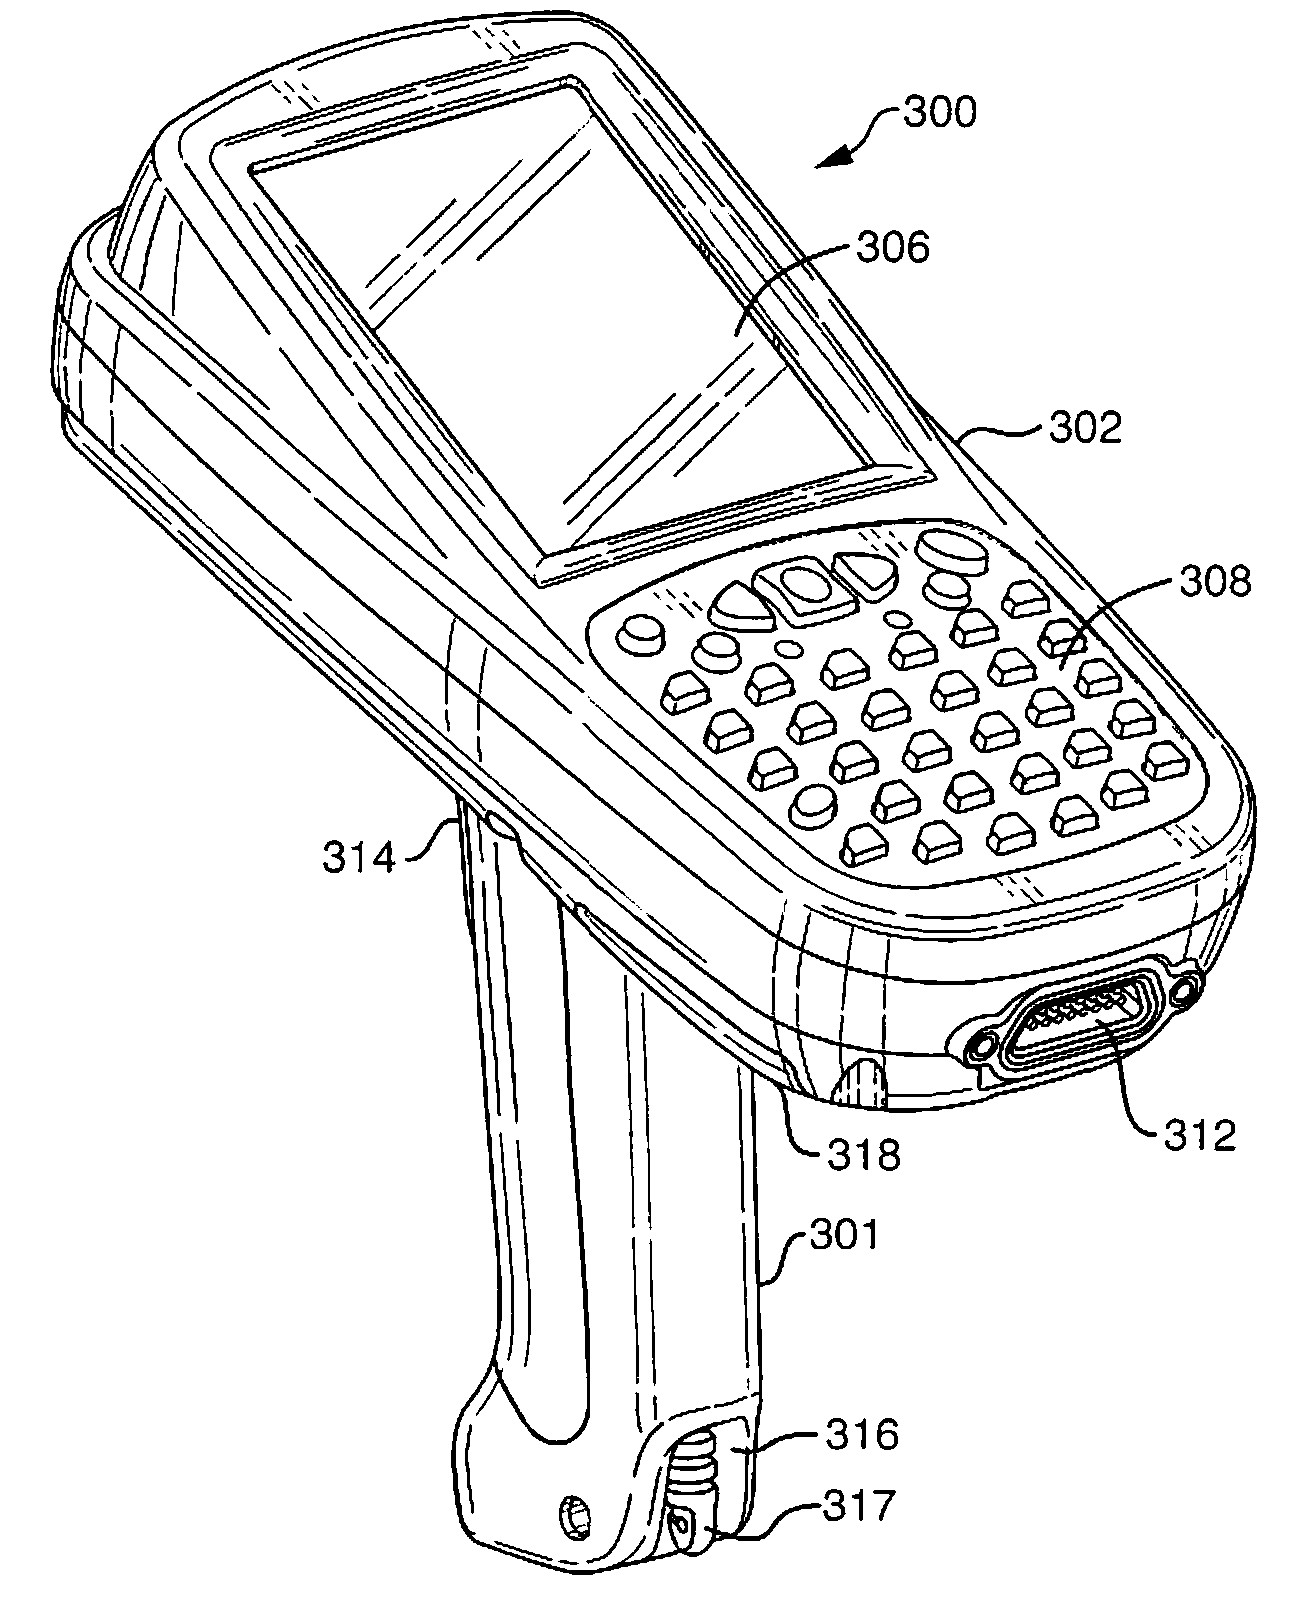 Portable data terminal and battery therefore